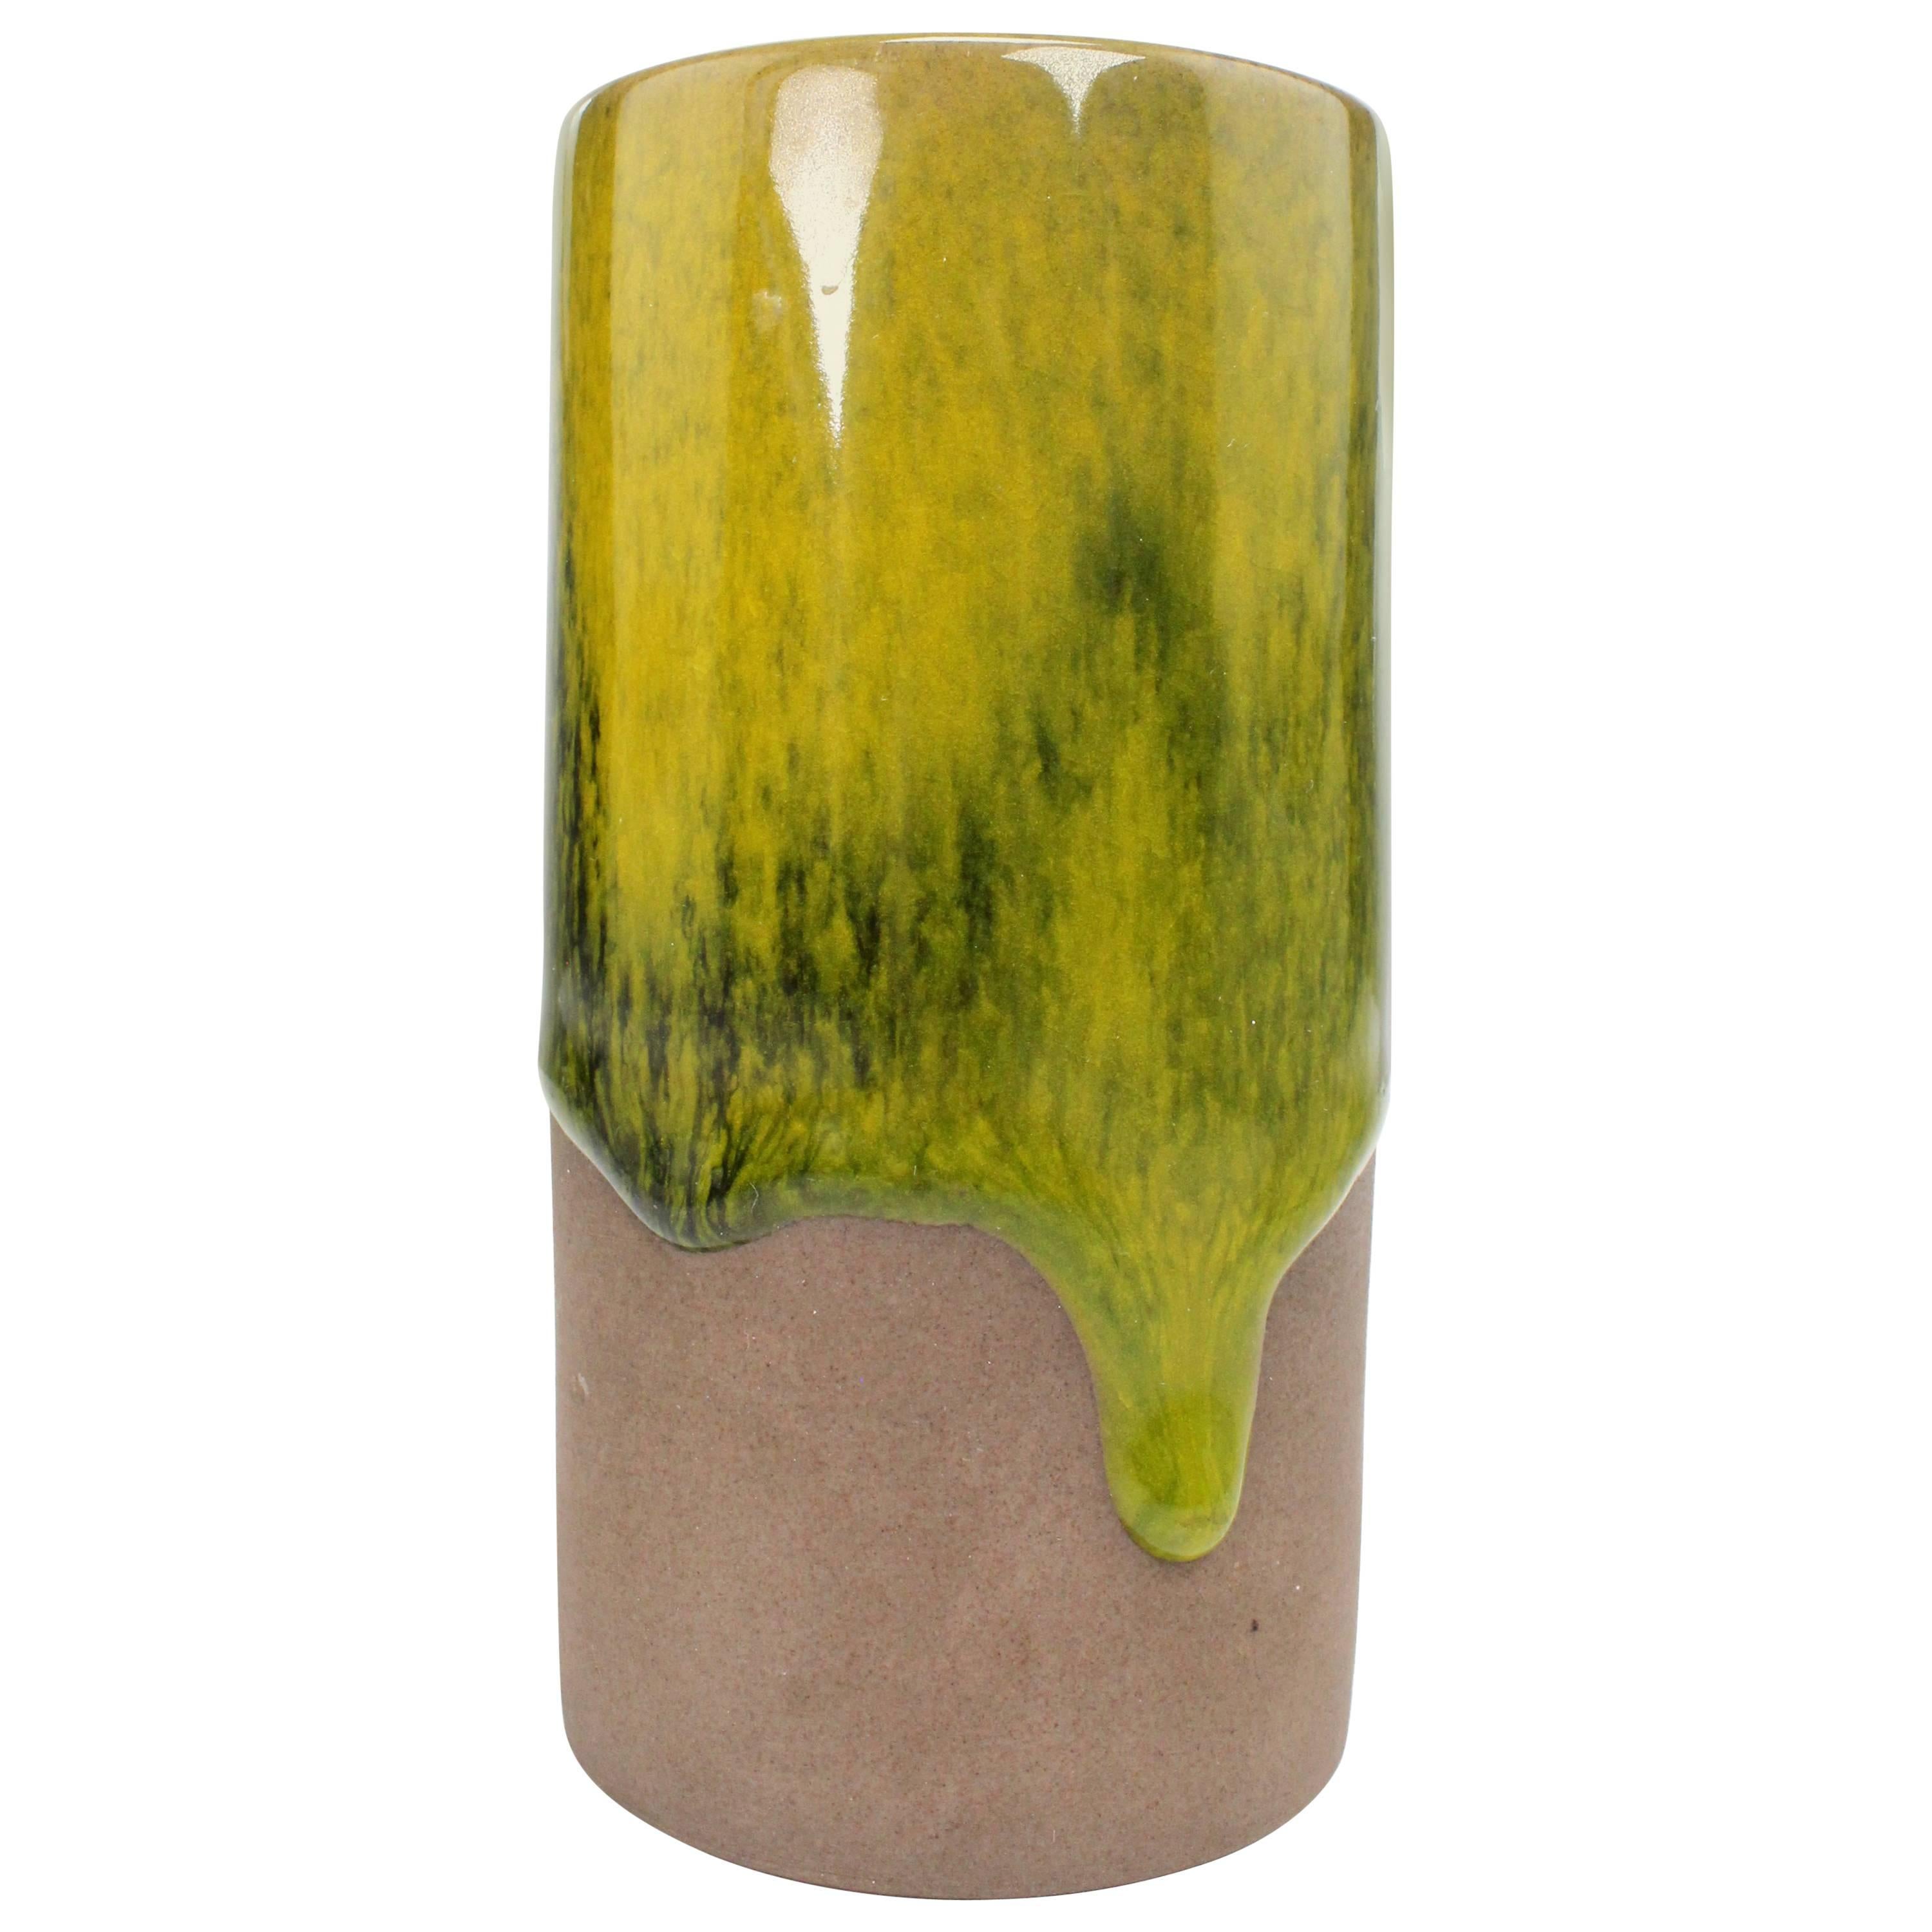 Gunnar Nylund for Danish Nymølle Green and Yellow Ceramic Vase, 1960s